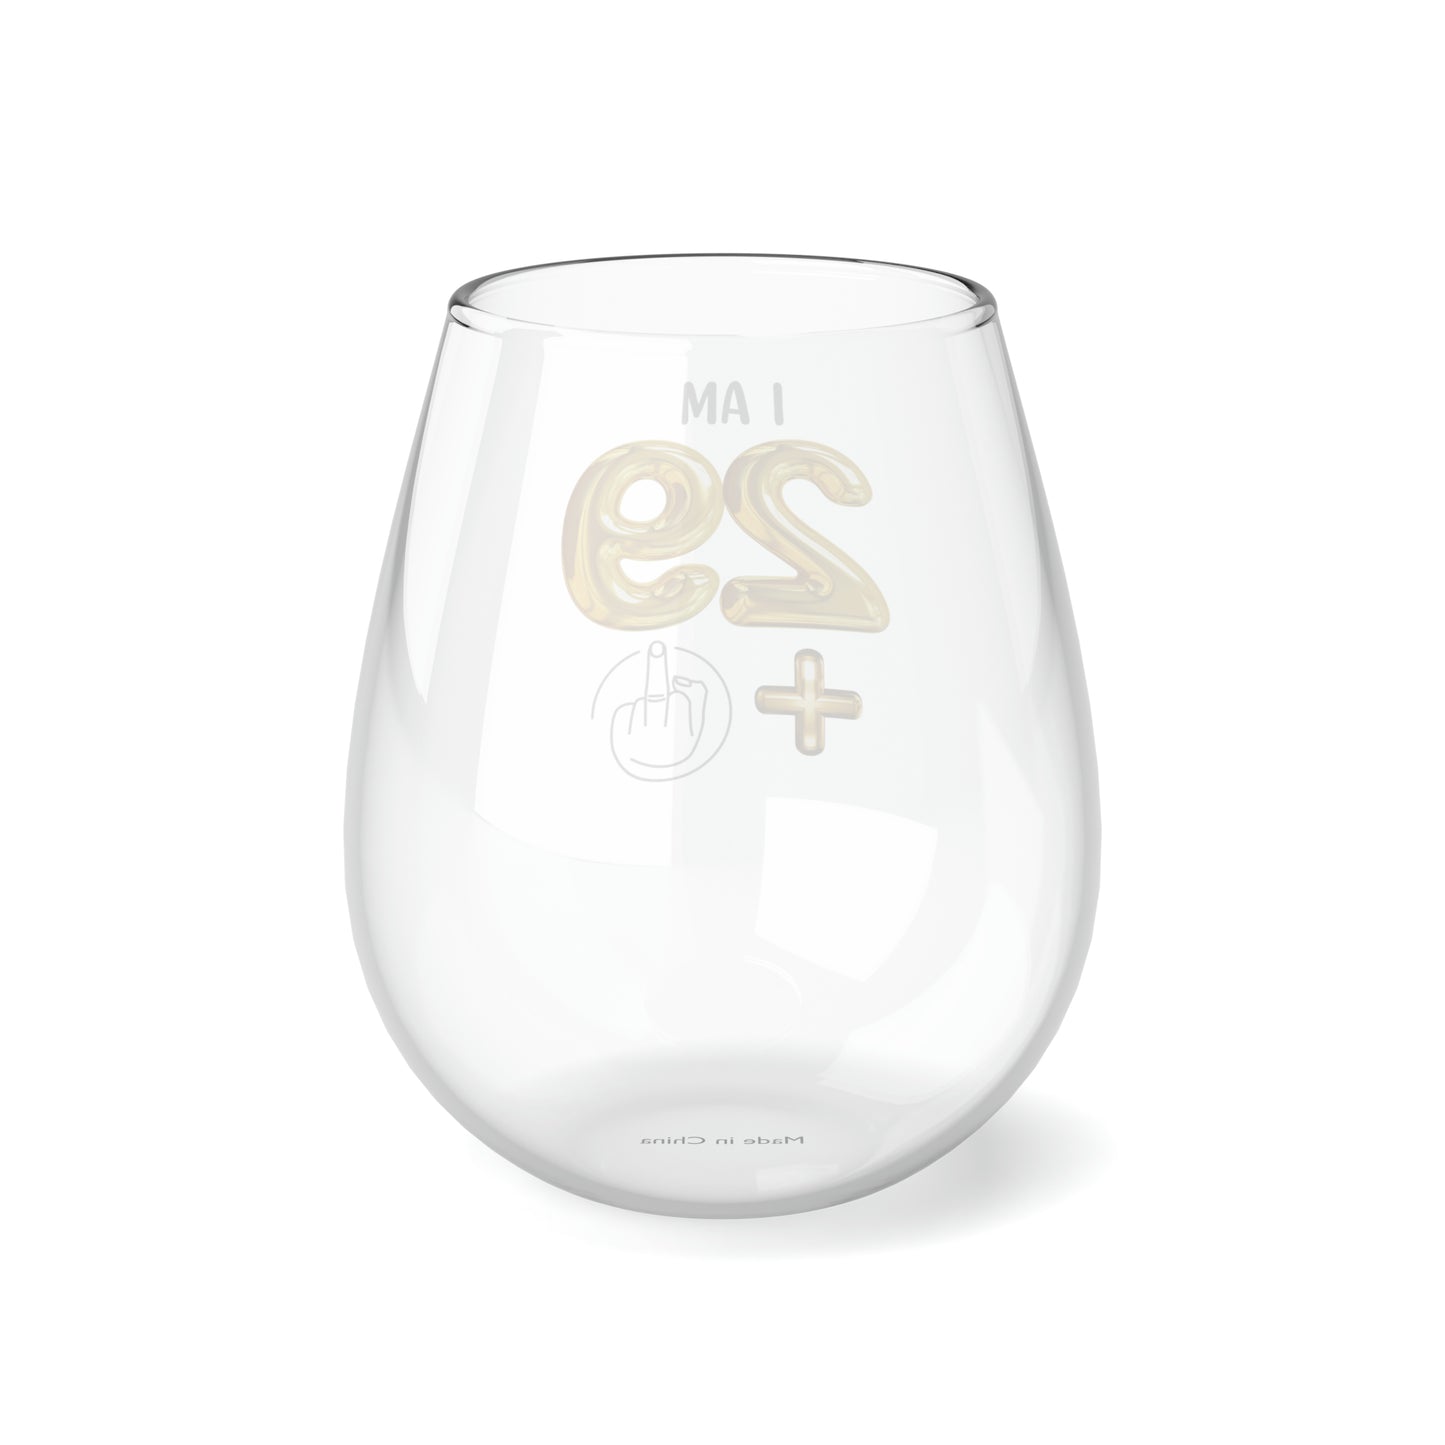 30th Birthday Wine Glass, I'm 29 + Middle Finger 30th Stemless Wine Glass, 30th Birthday Party Glass Tumbler Gift